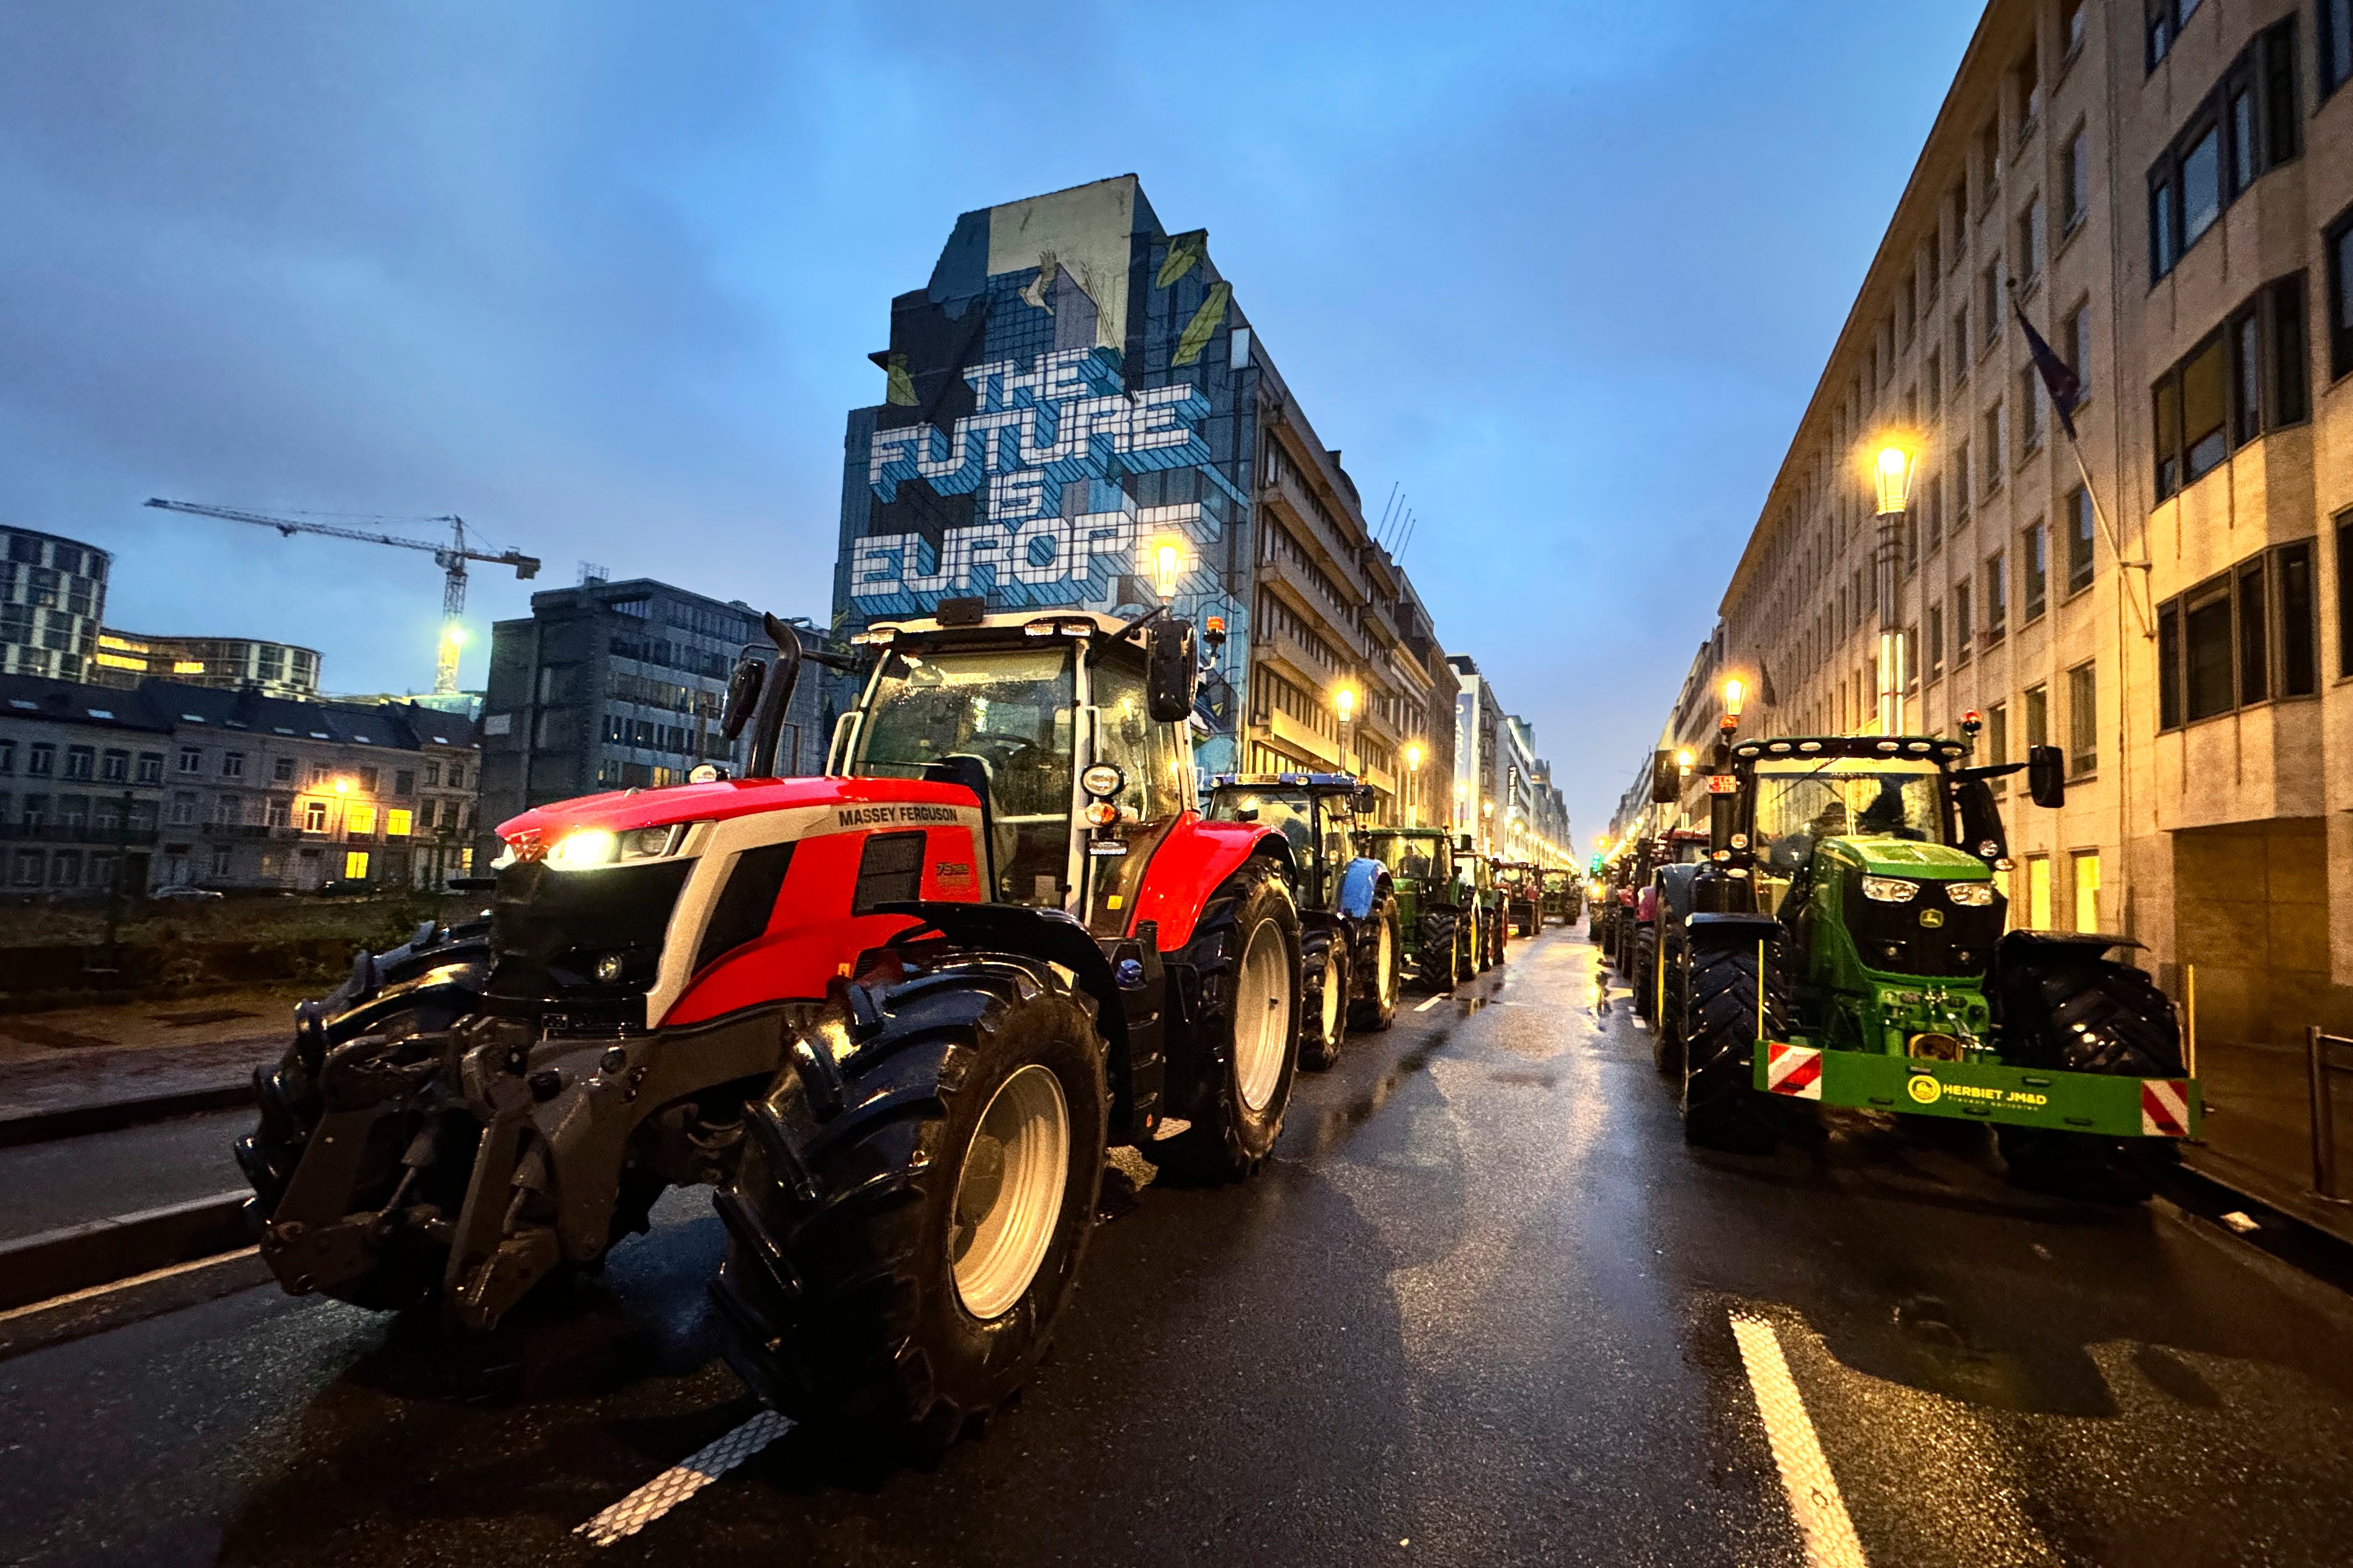 The first tractors arrive in the European Quarter during a protest of farmers outside a meeting of EU agriculture ministers